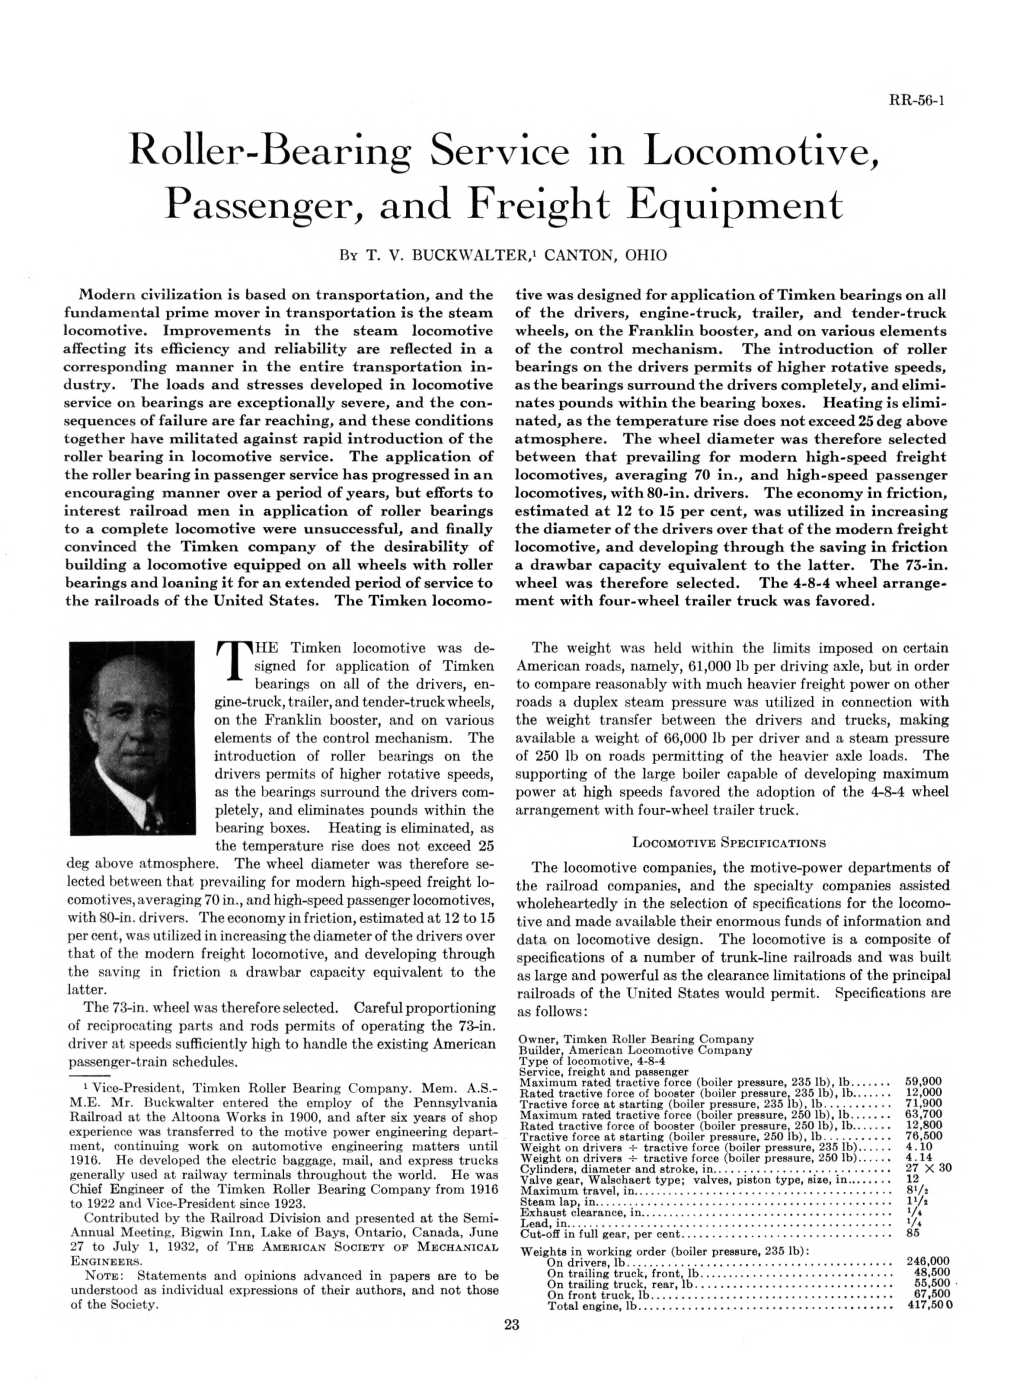 Roller-Bearing Service in Locomotive, Passenger, and Freight Equipment